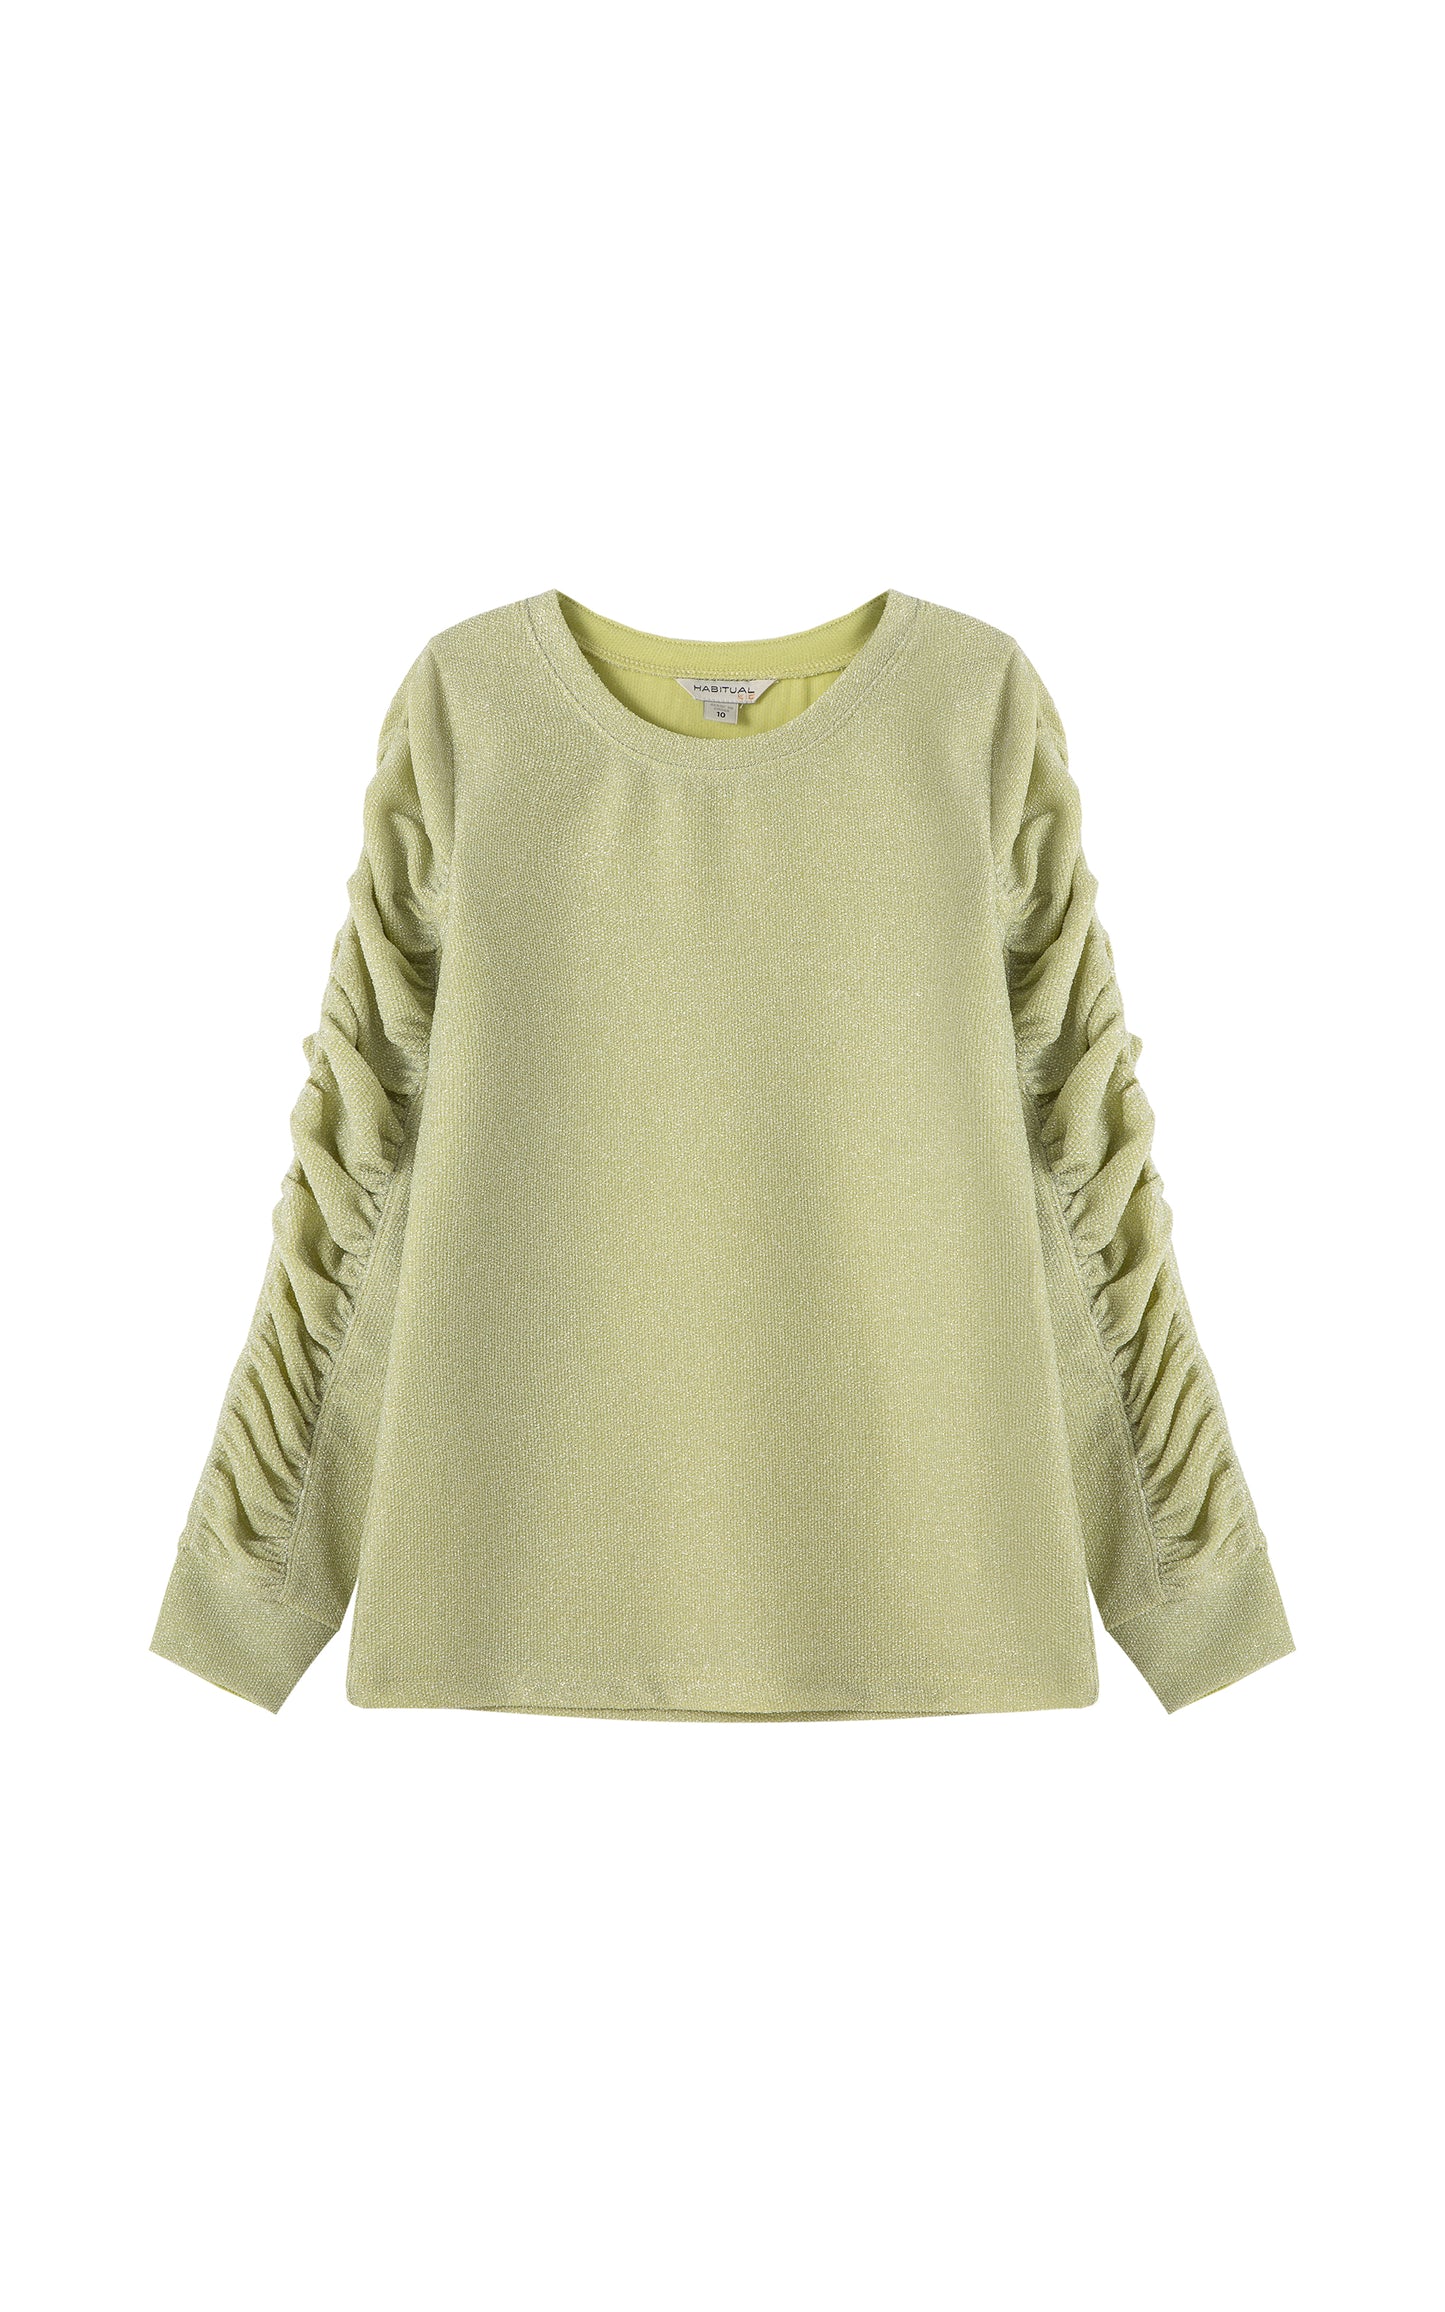 Front view of light green crewneck top with Metallic accents and gathered, long sleeves.